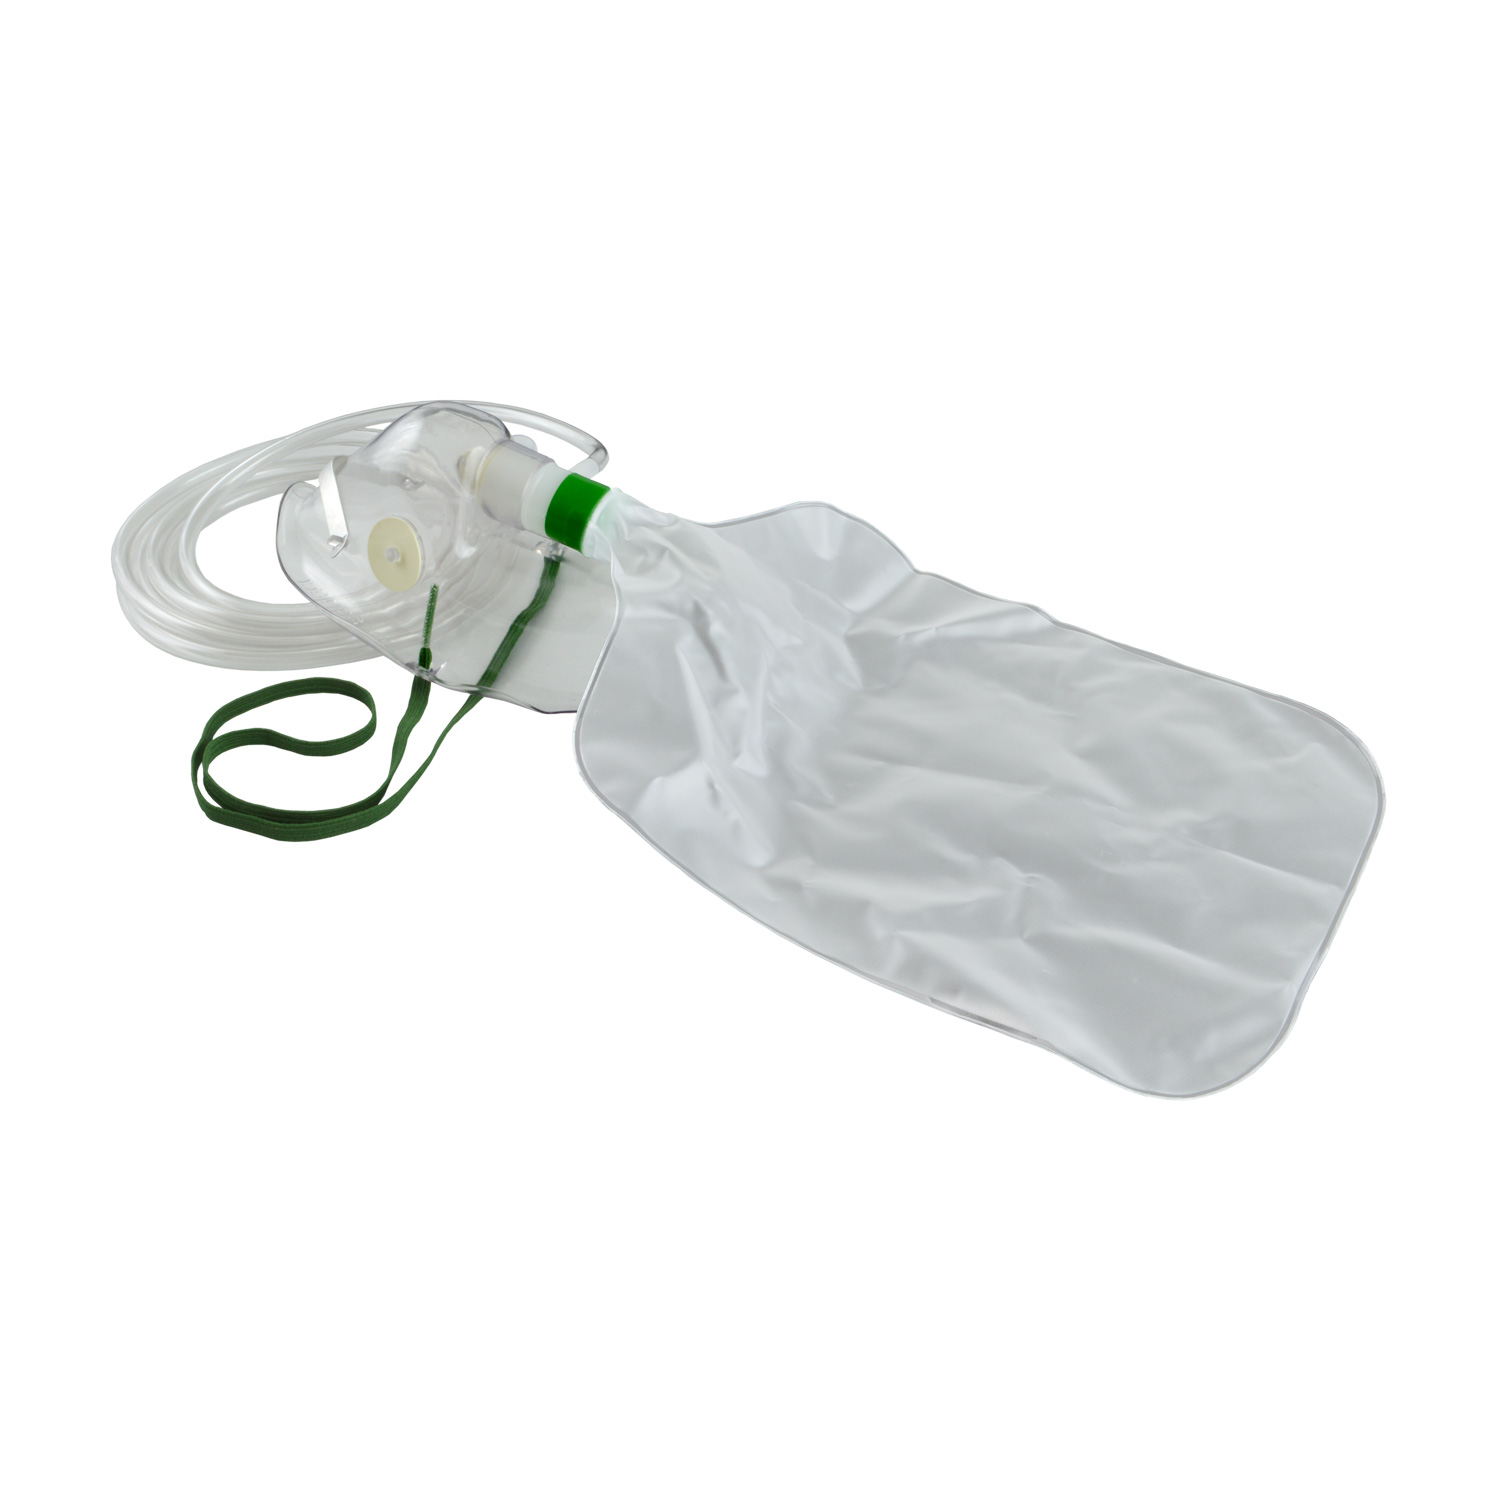 Reservoir Bag Manufacturers, Suppliers and Exporters from India, China